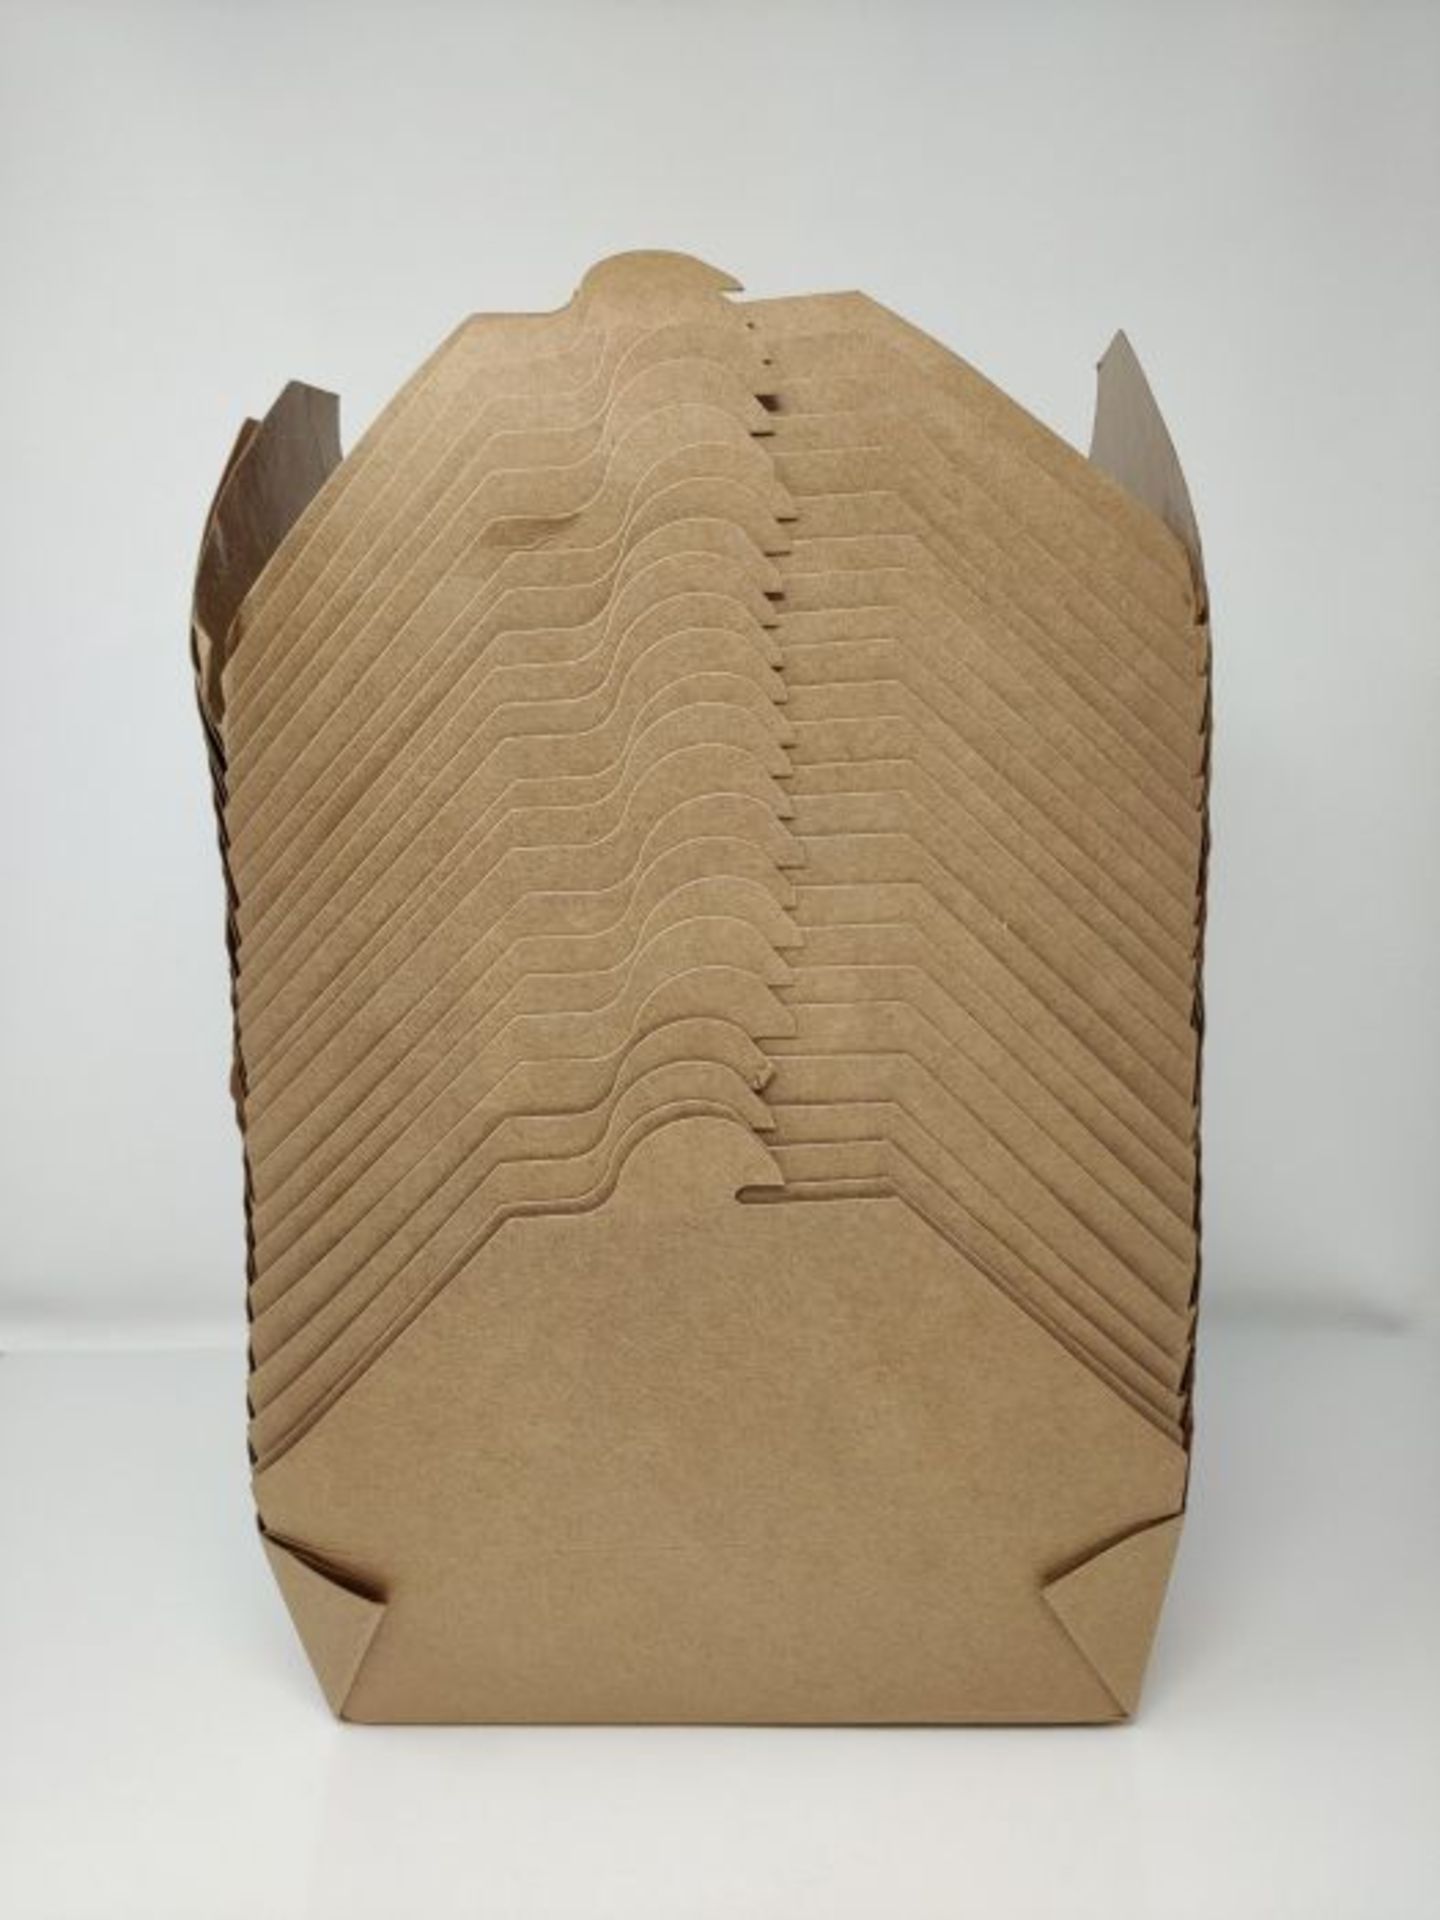 Disposable Kraft Paper Box To Go Containers - 25 Biodegradable Hot and Cold Take Out F - Image 2 of 3